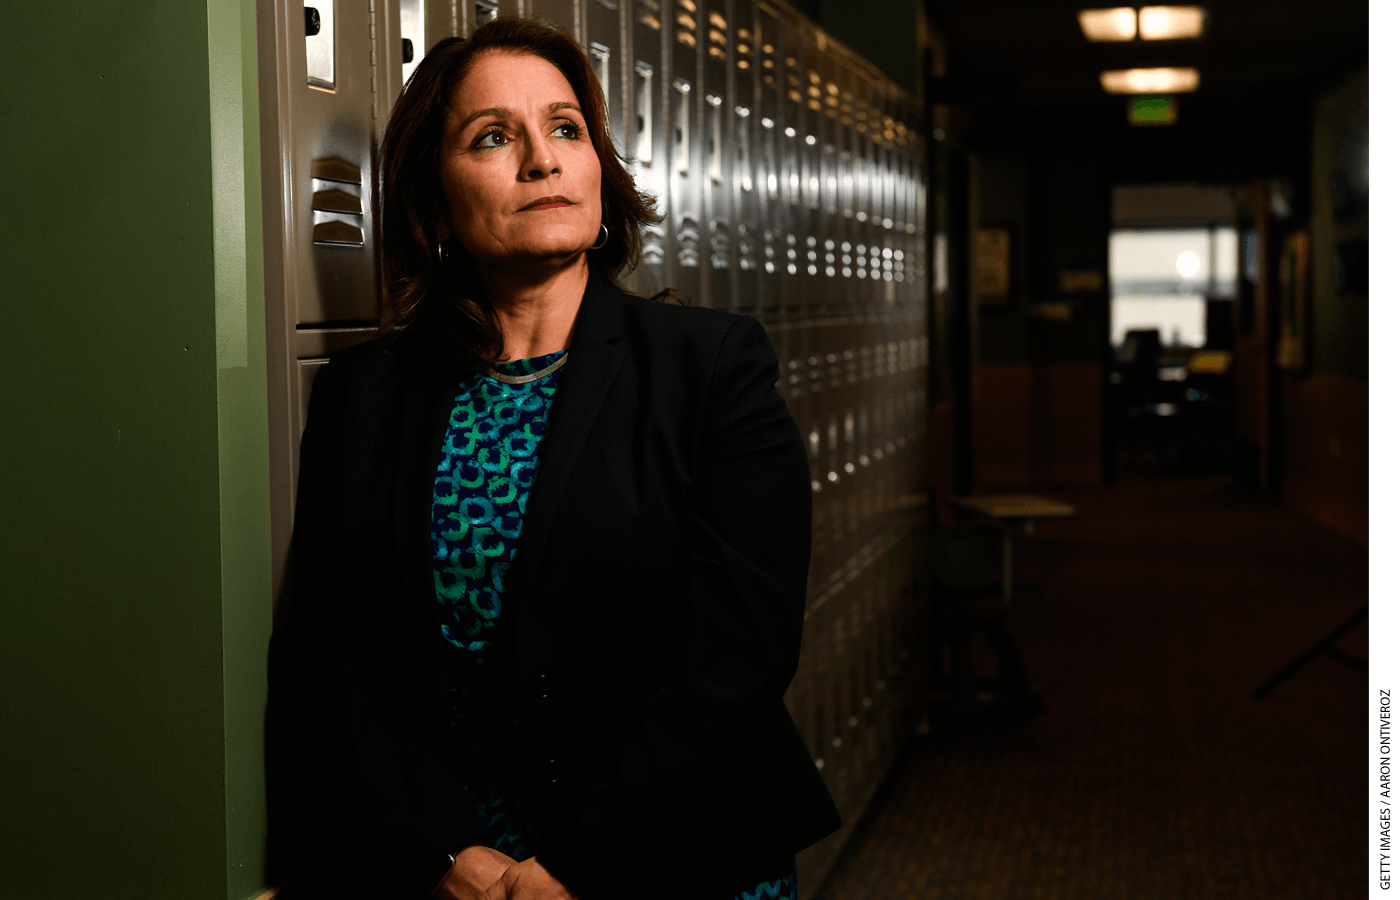 In fall 2020, Superintendent Susana Cordova resigned after less than two years on the job.